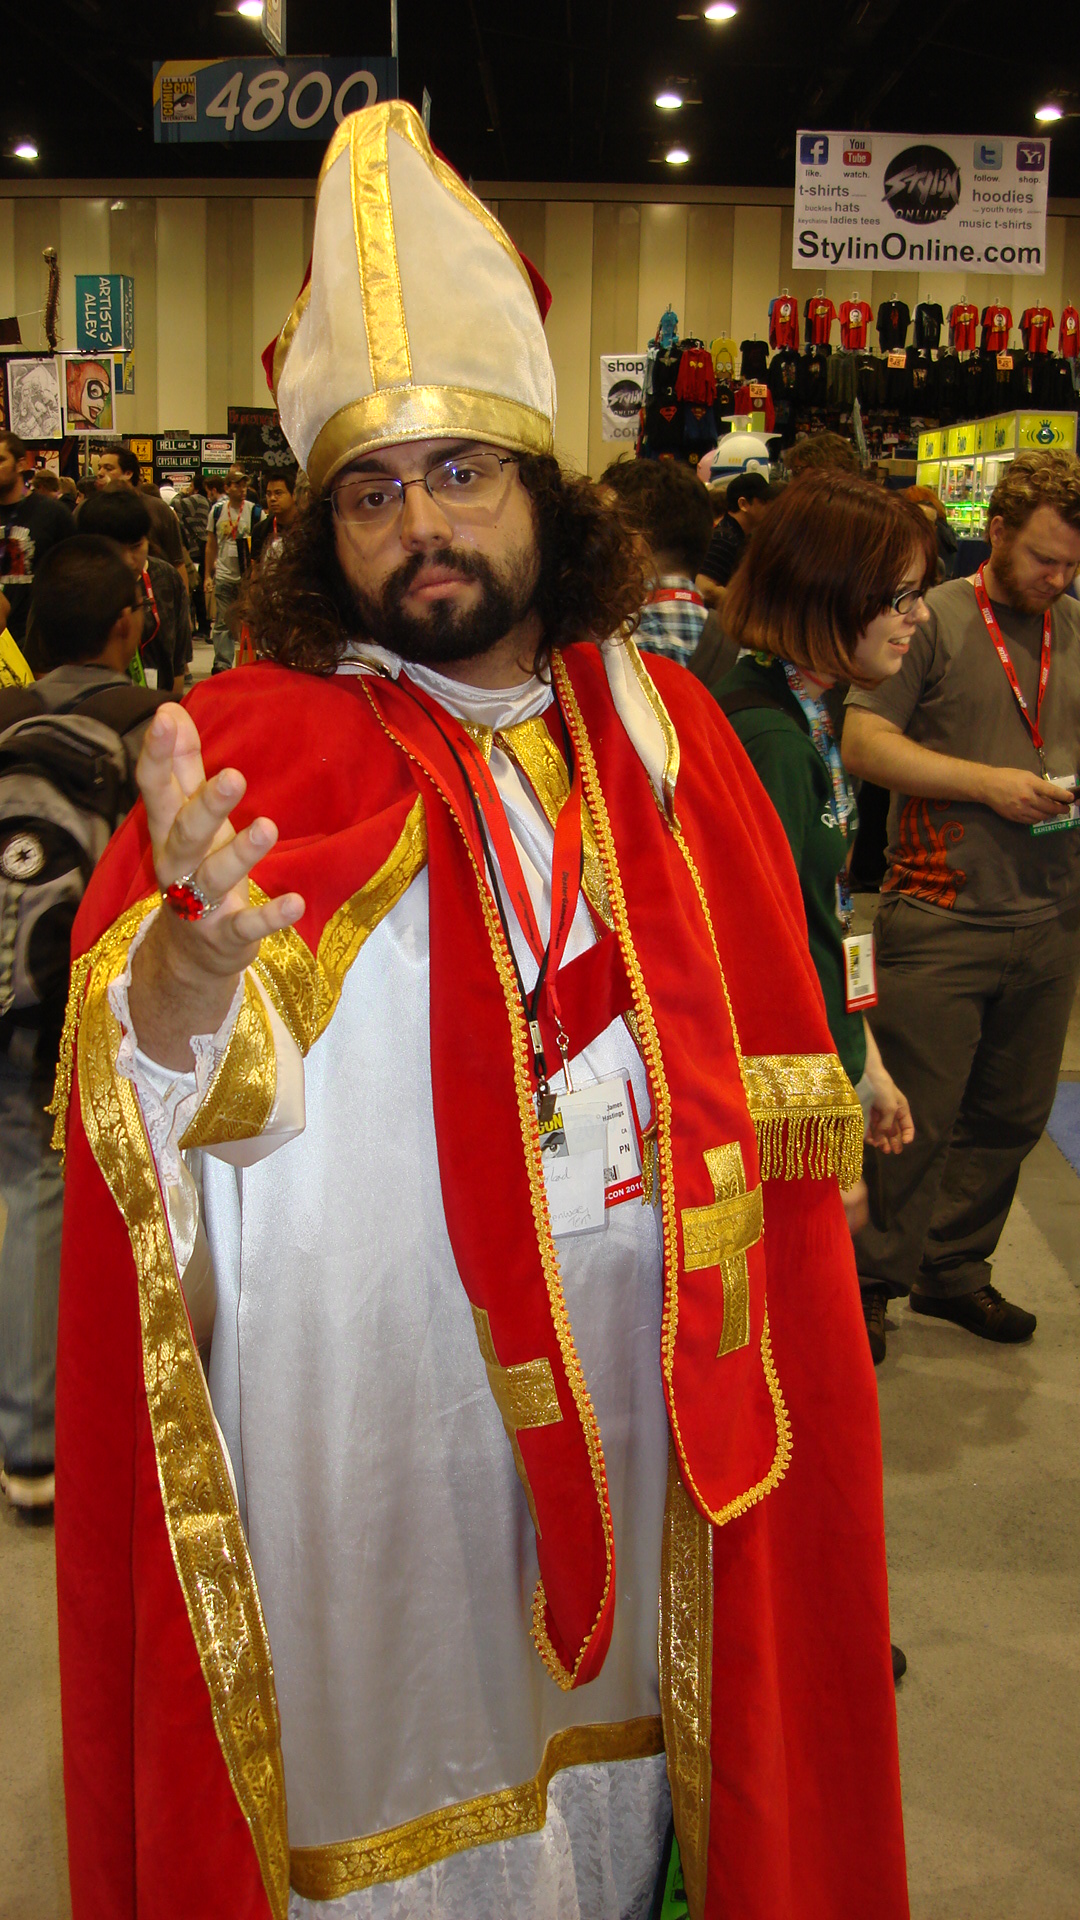 https://www.entertainmentfuse.com/images/PAC - Comic Con - The Pope.JPG